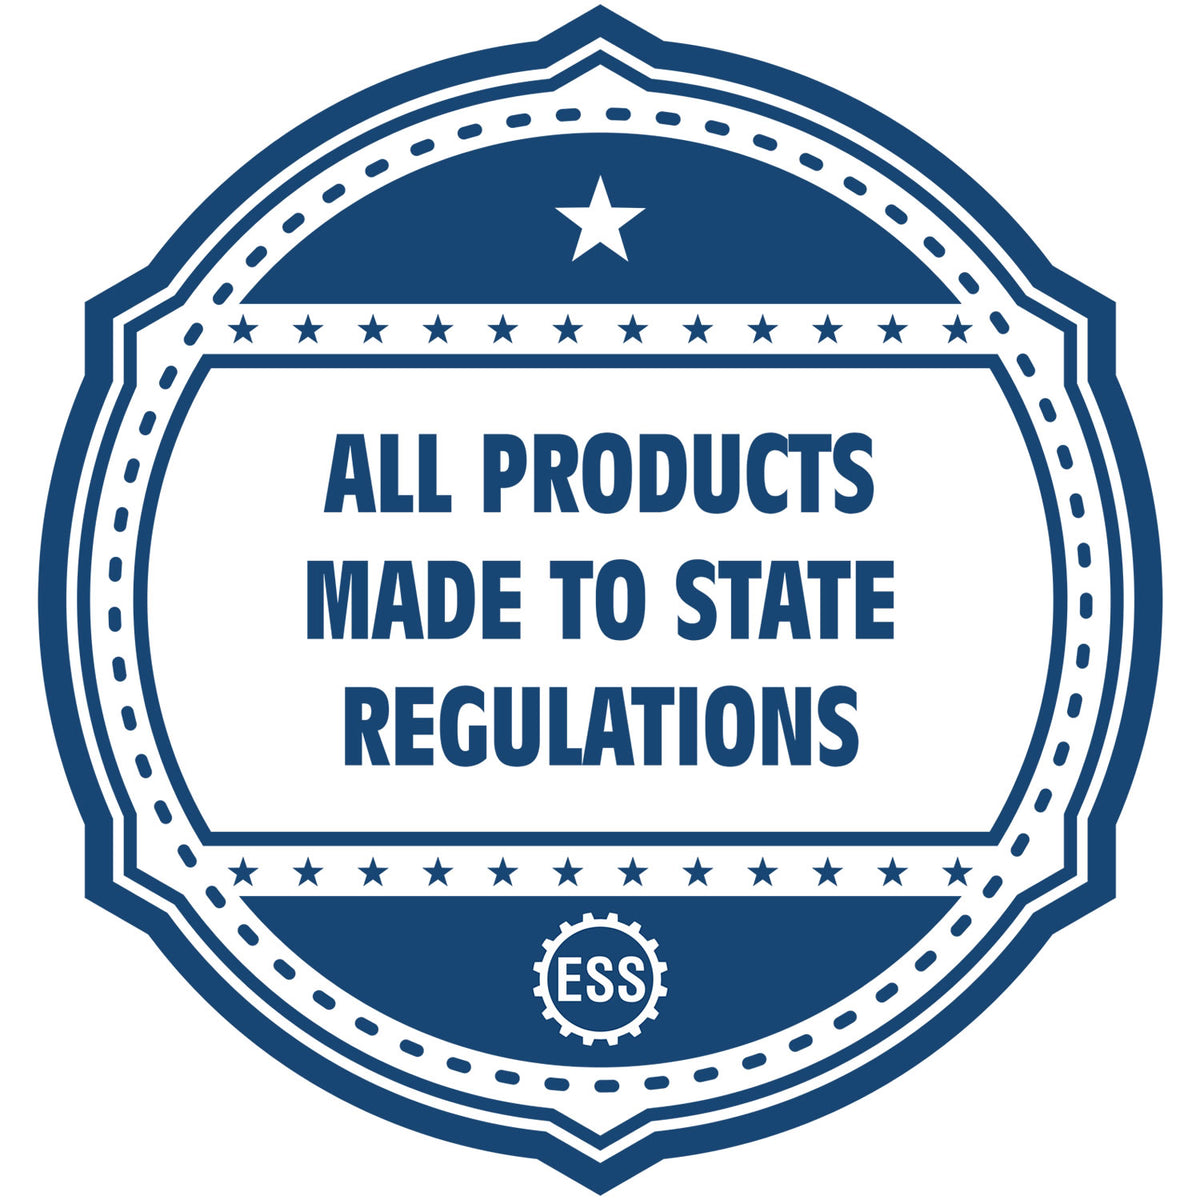 An icon or badge element for the State of Delaware Long Reach Architectural Embossing Seal showing that this product is made in compliance with state regulations.